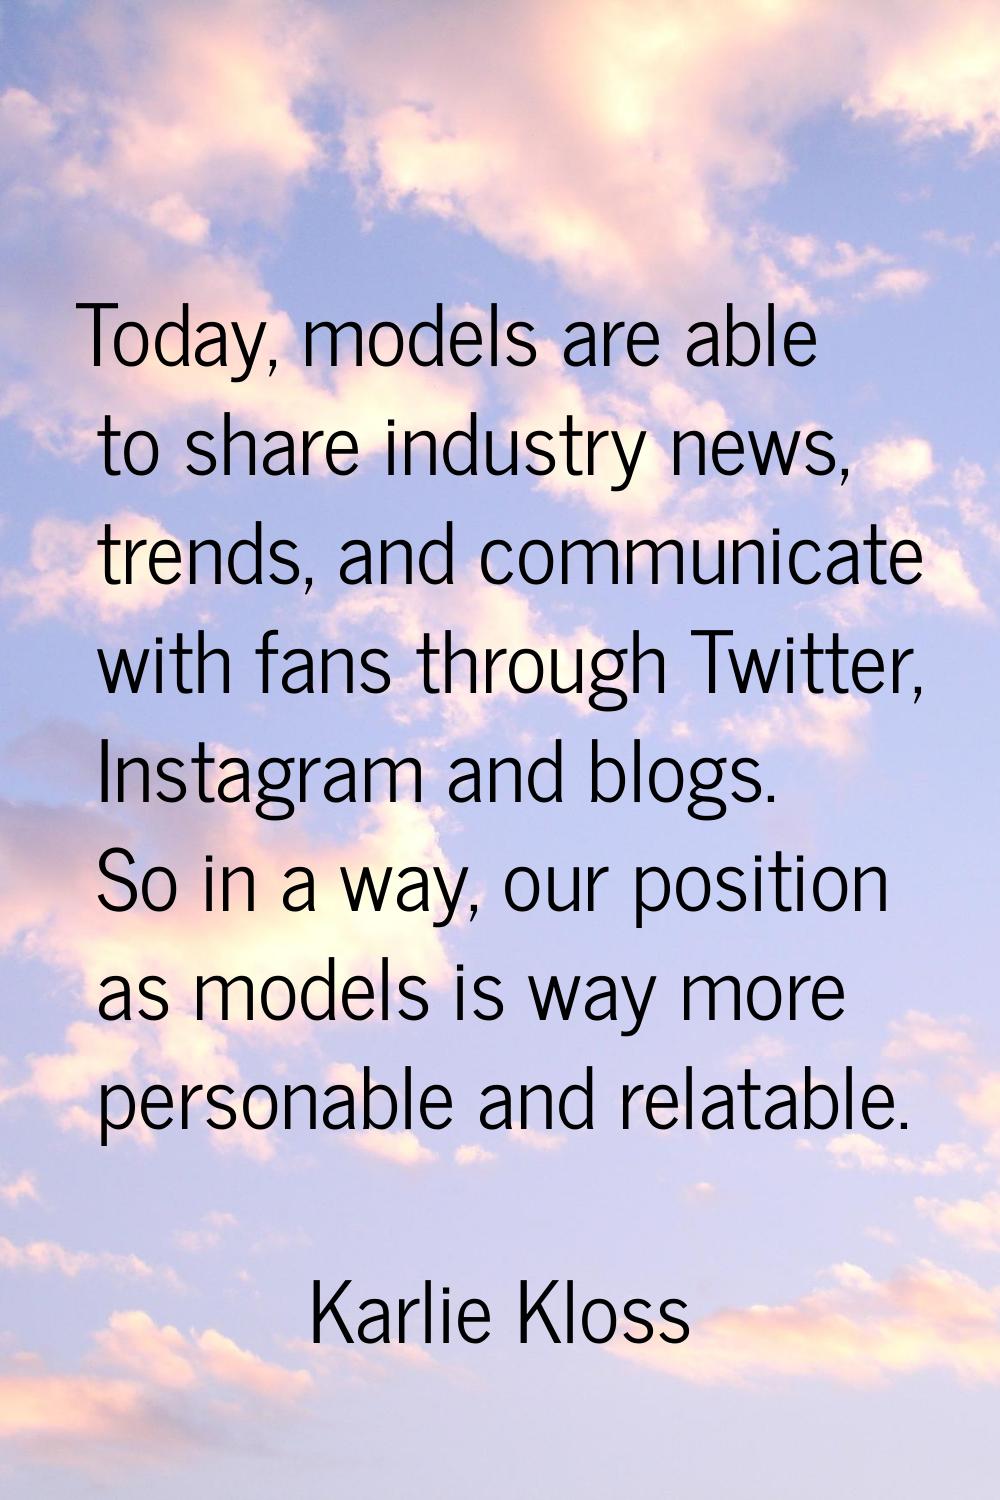 Today, models are able to share industry news, trends, and communicate with fans through Twitter, I